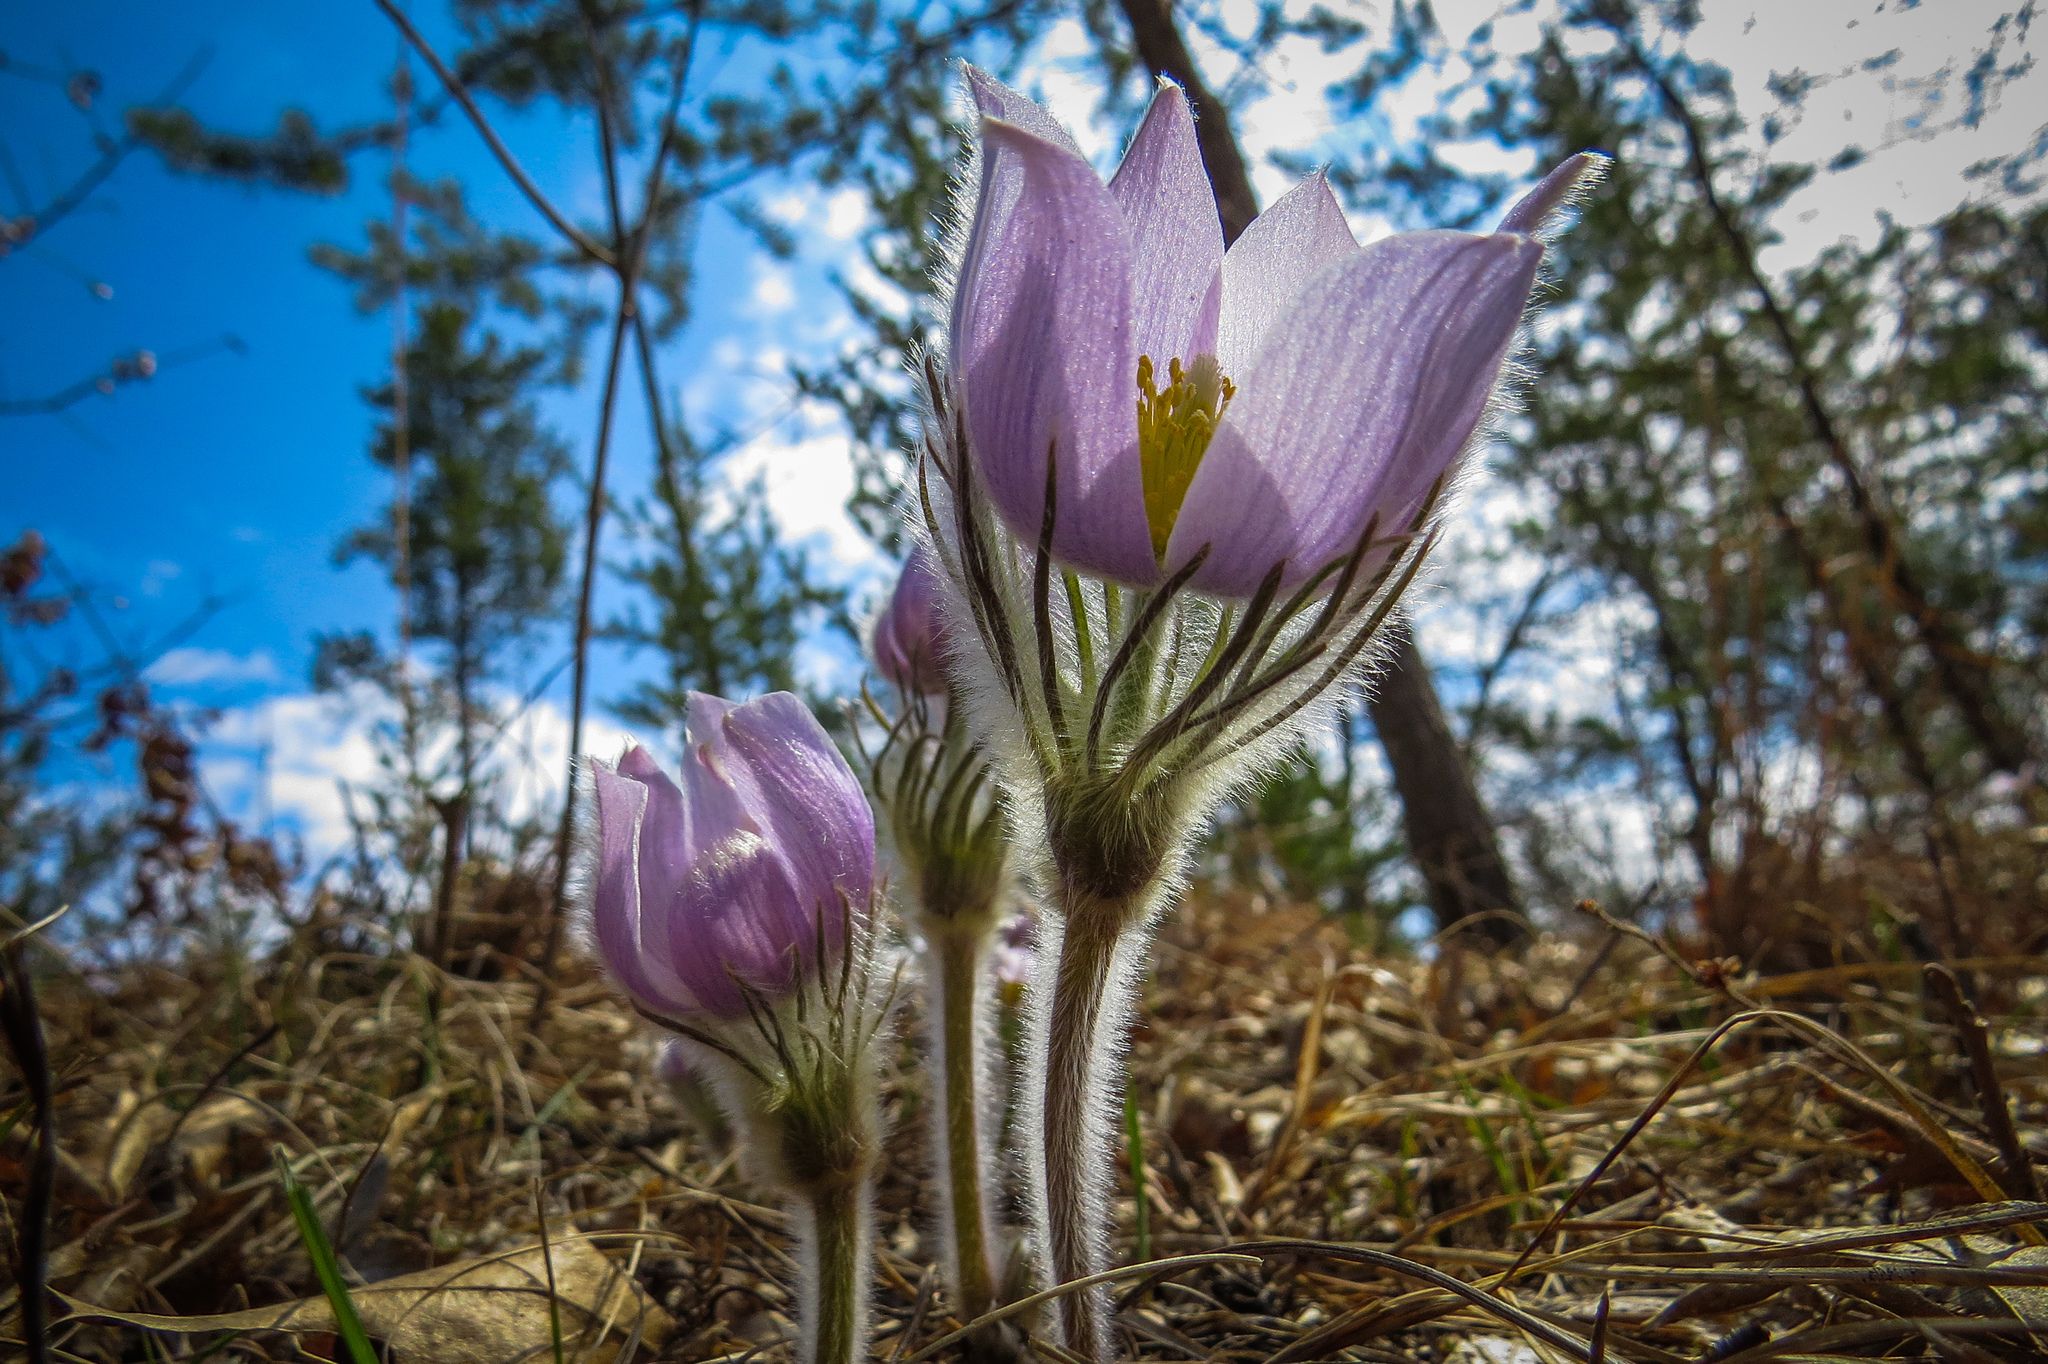 Pasqueflower has purple petals and hair stems and leaves.